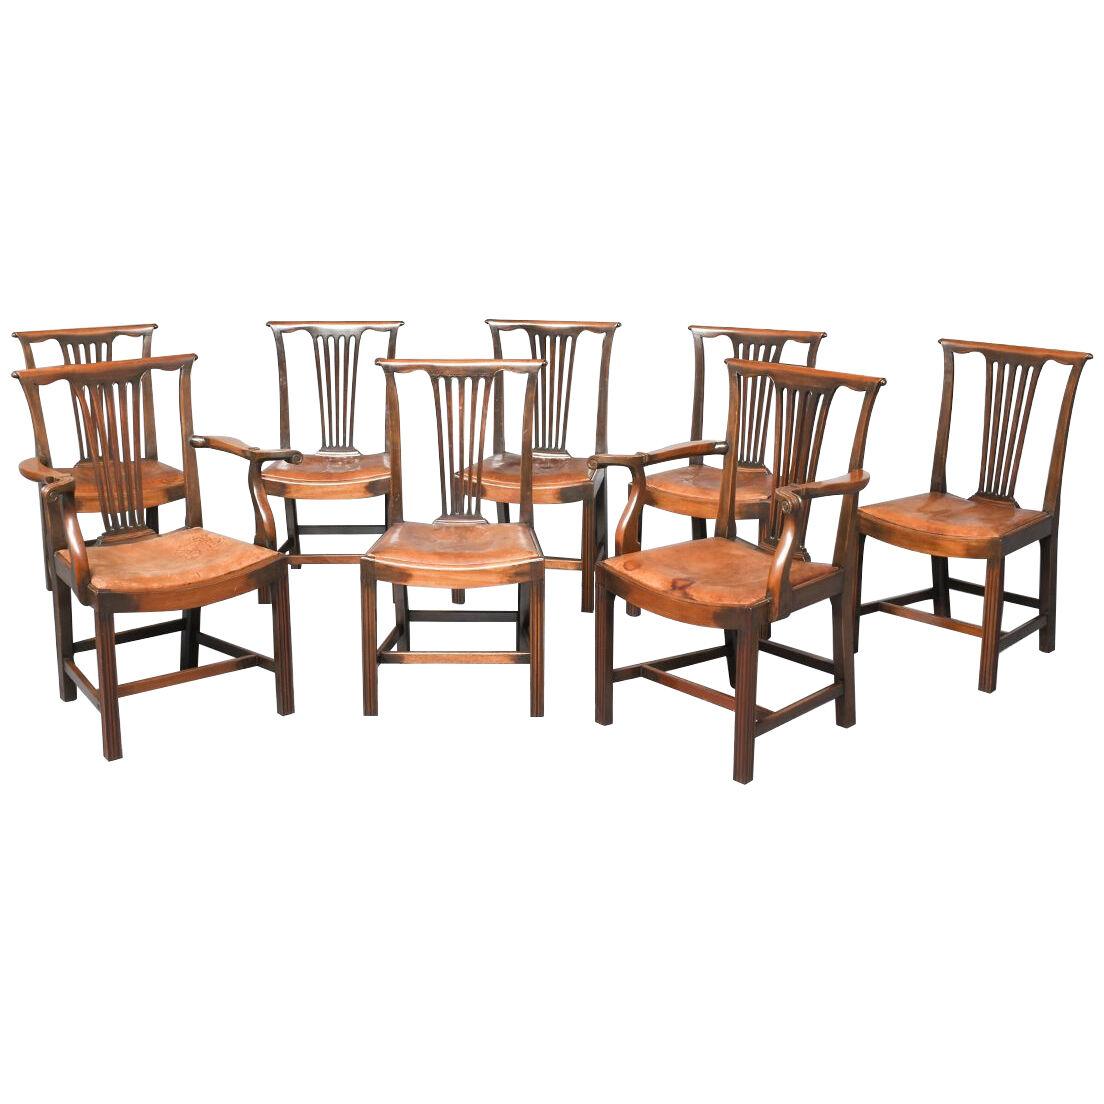 Set of 8 Georgian Style Dining Chairs